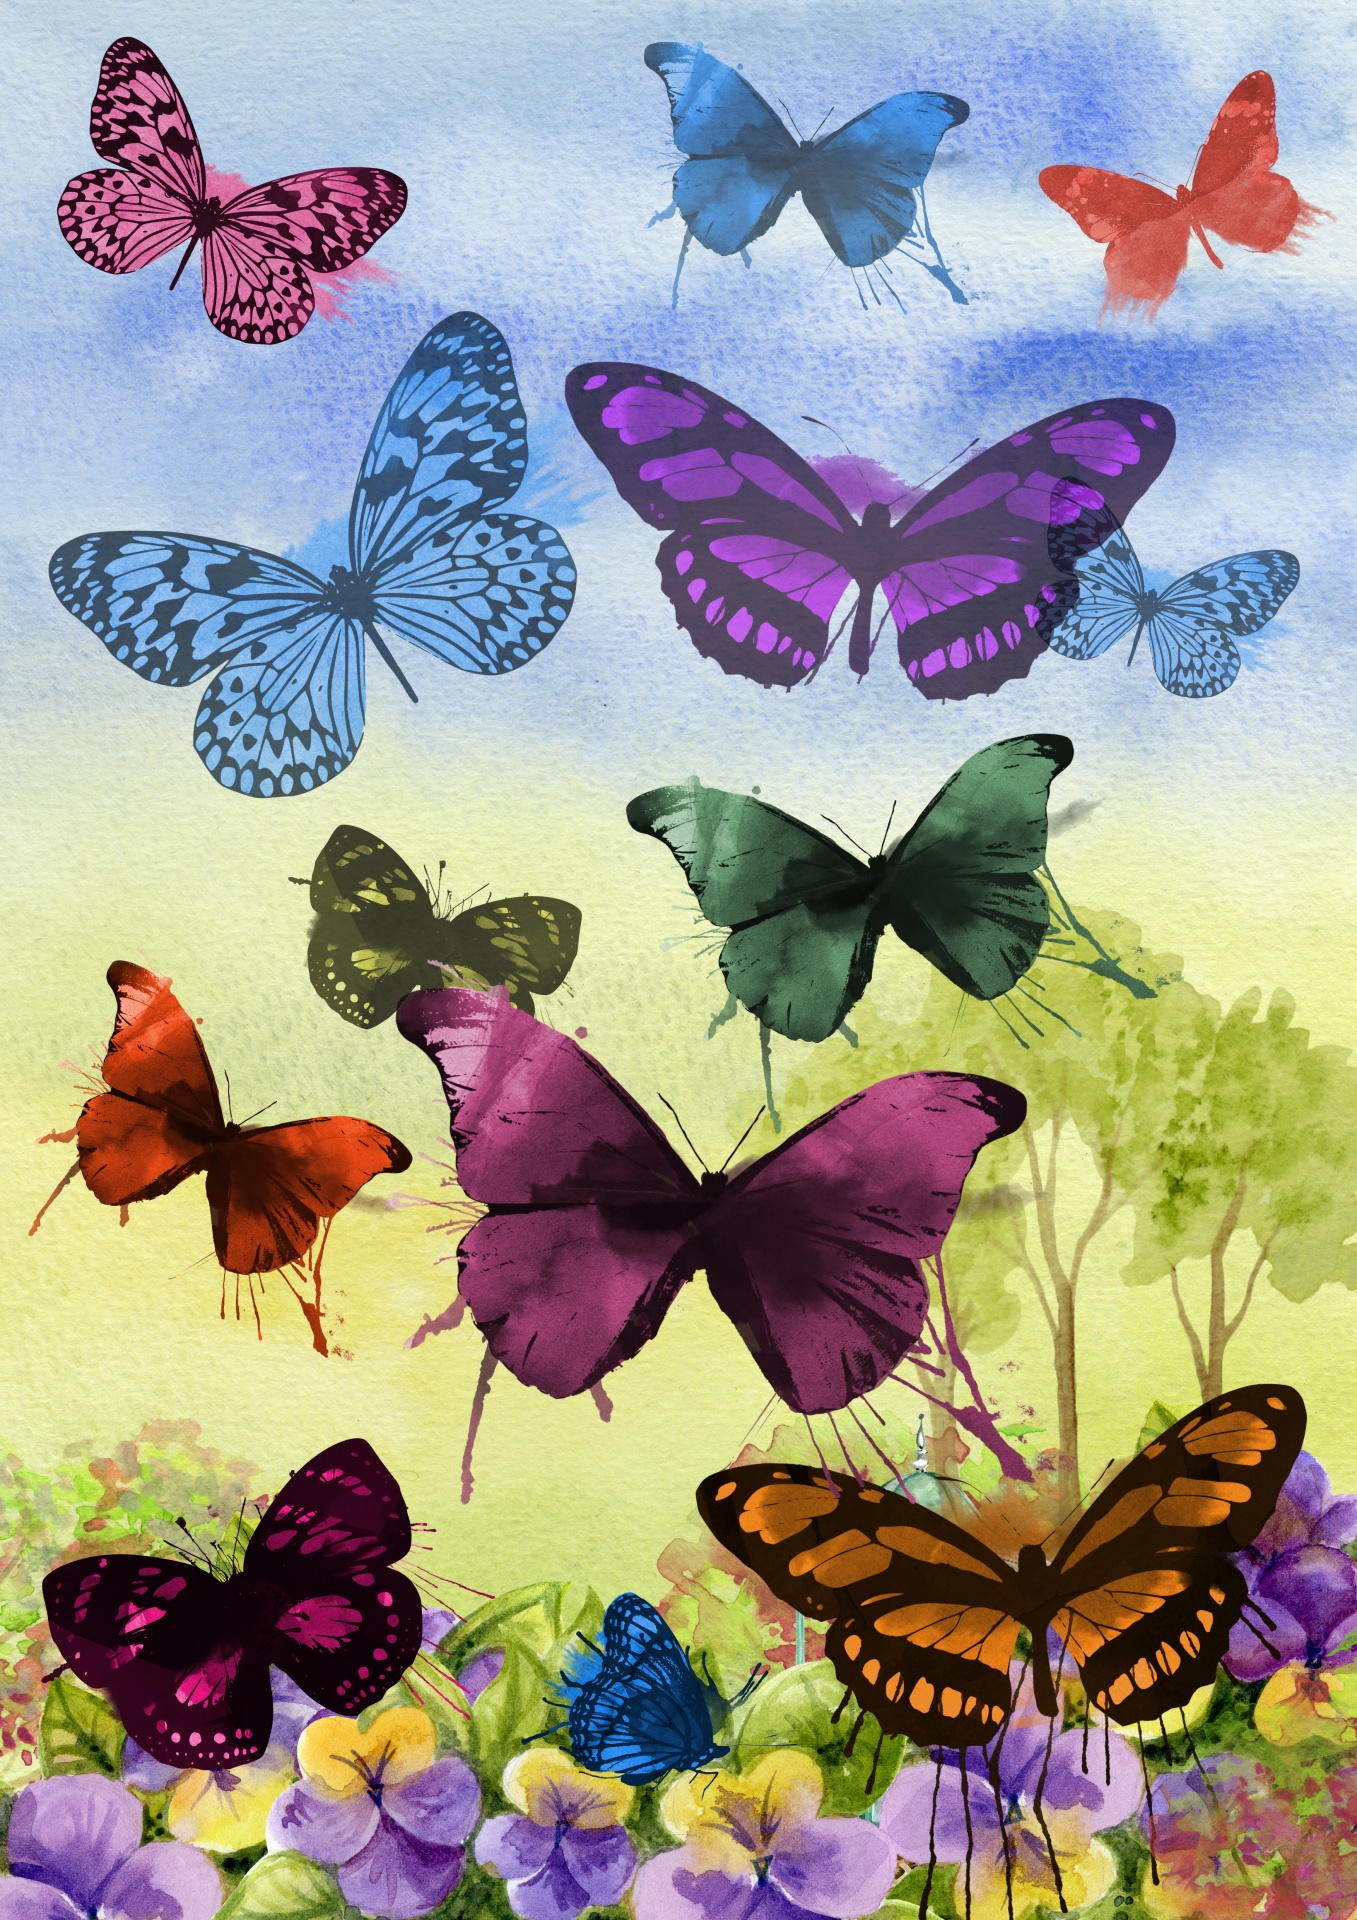 Watercolor Butterflies Art Work with colorful and vibrant butterflies flying in a field